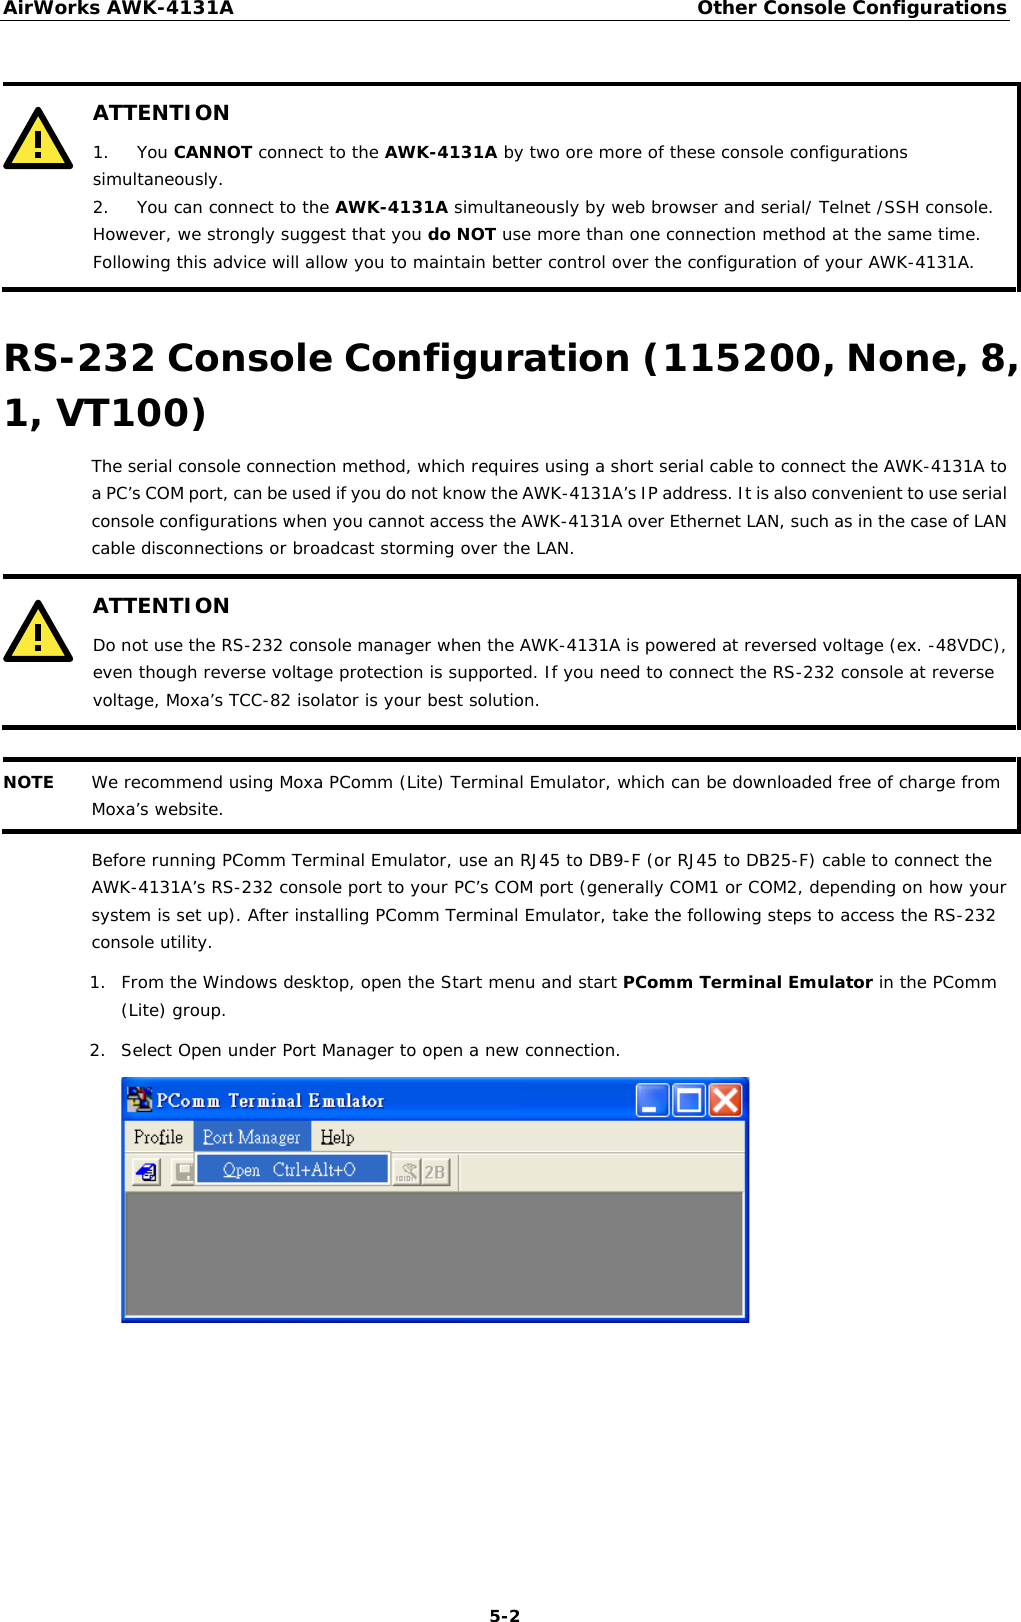 AirWorks AWK-4131A Other Console Configurations  5-2   ATTENTION 1. You CANNOT connect to the AWK-4131A by two ore more of these console configurations simultaneously. 2. You can connect to the AWK-4131A simultaneously by web browser and serial/ Telnet /SSH console. However, we strongly suggest that you do NOT use more than one connection method at the same time. Following this advice will allow you to maintain better control over the configuration of your AWK-4131A.  RS-232 Console Configuration (115200, None, 8, 1, VT100) The serial console connection method, which requires using a short serial cable to connect the AWK-4131A to a PC’s COM port, can be used if you do not know the AWK-4131A’s IP address. It is also convenient to use serial console configurations when you cannot access the AWK-4131A over Ethernet LAN, such as in the case of LAN cable disconnections or broadcast storming over the LAN.  ATTENTION Do not use the RS-232 console manager when the AWK-4131A is powered at reversed voltage (ex. -48VDC), even though reverse voltage protection is supported. If you need to connect the RS-232 console at reverse voltage, Moxa’s TCC-82 isolator is your best solution.   NOTE We recommend using Moxa PComm (Lite) Terminal Emulator, which can be downloaded free of charge from Moxa’s website.  Before running PComm Terminal Emulator, use an RJ45 to DB9-F (or RJ45 to DB25-F) cable to connect the AWK-4131A’s RS-232 console port to your PC’s COM port (generally COM1 or COM2, depending on how your system is set up). After installing PComm Terminal Emulator, take the following steps to access the RS-232 console utility. 1. From the Windows desktop, open the Start menu and start PComm Terminal Emulator in the PComm (Lite) group. 2. Select Open under Port Manager to open a new connection.        